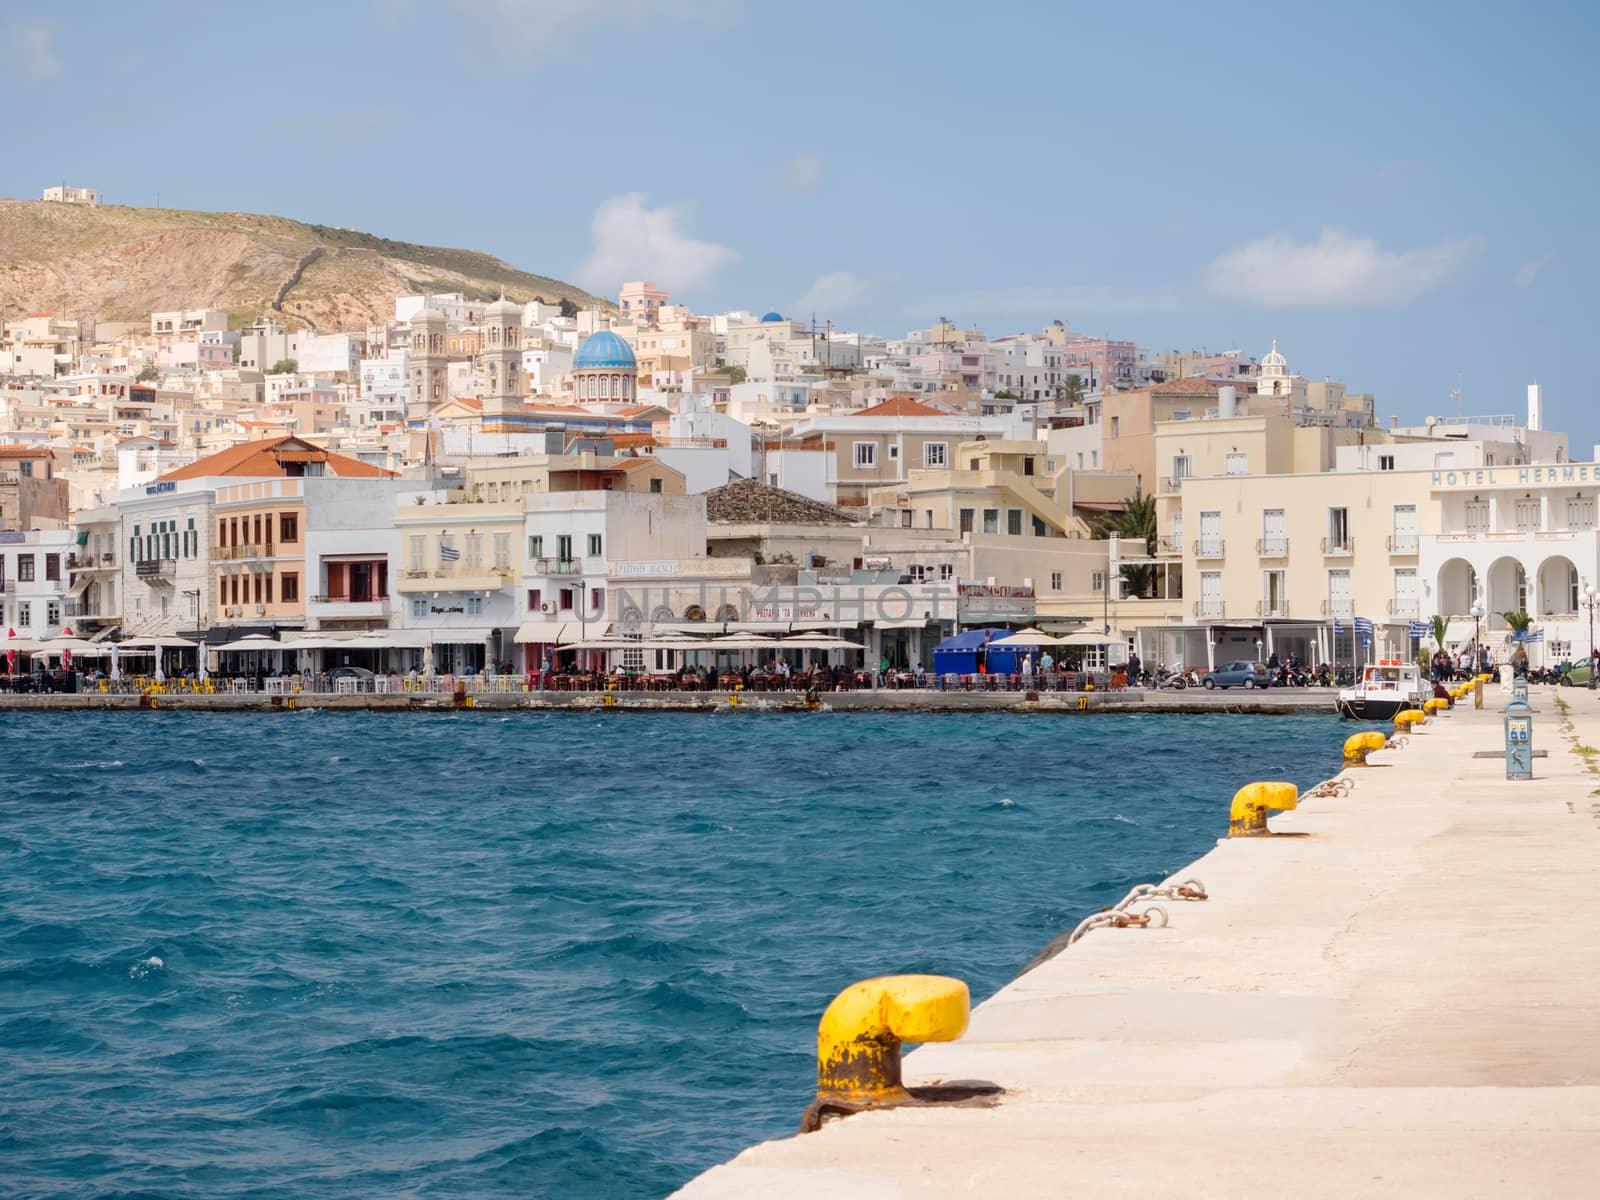 SYROS, GREECE - APRIL 10, 2016: View of Syros port with beautiful buildings and houses in a sunny day with clouds